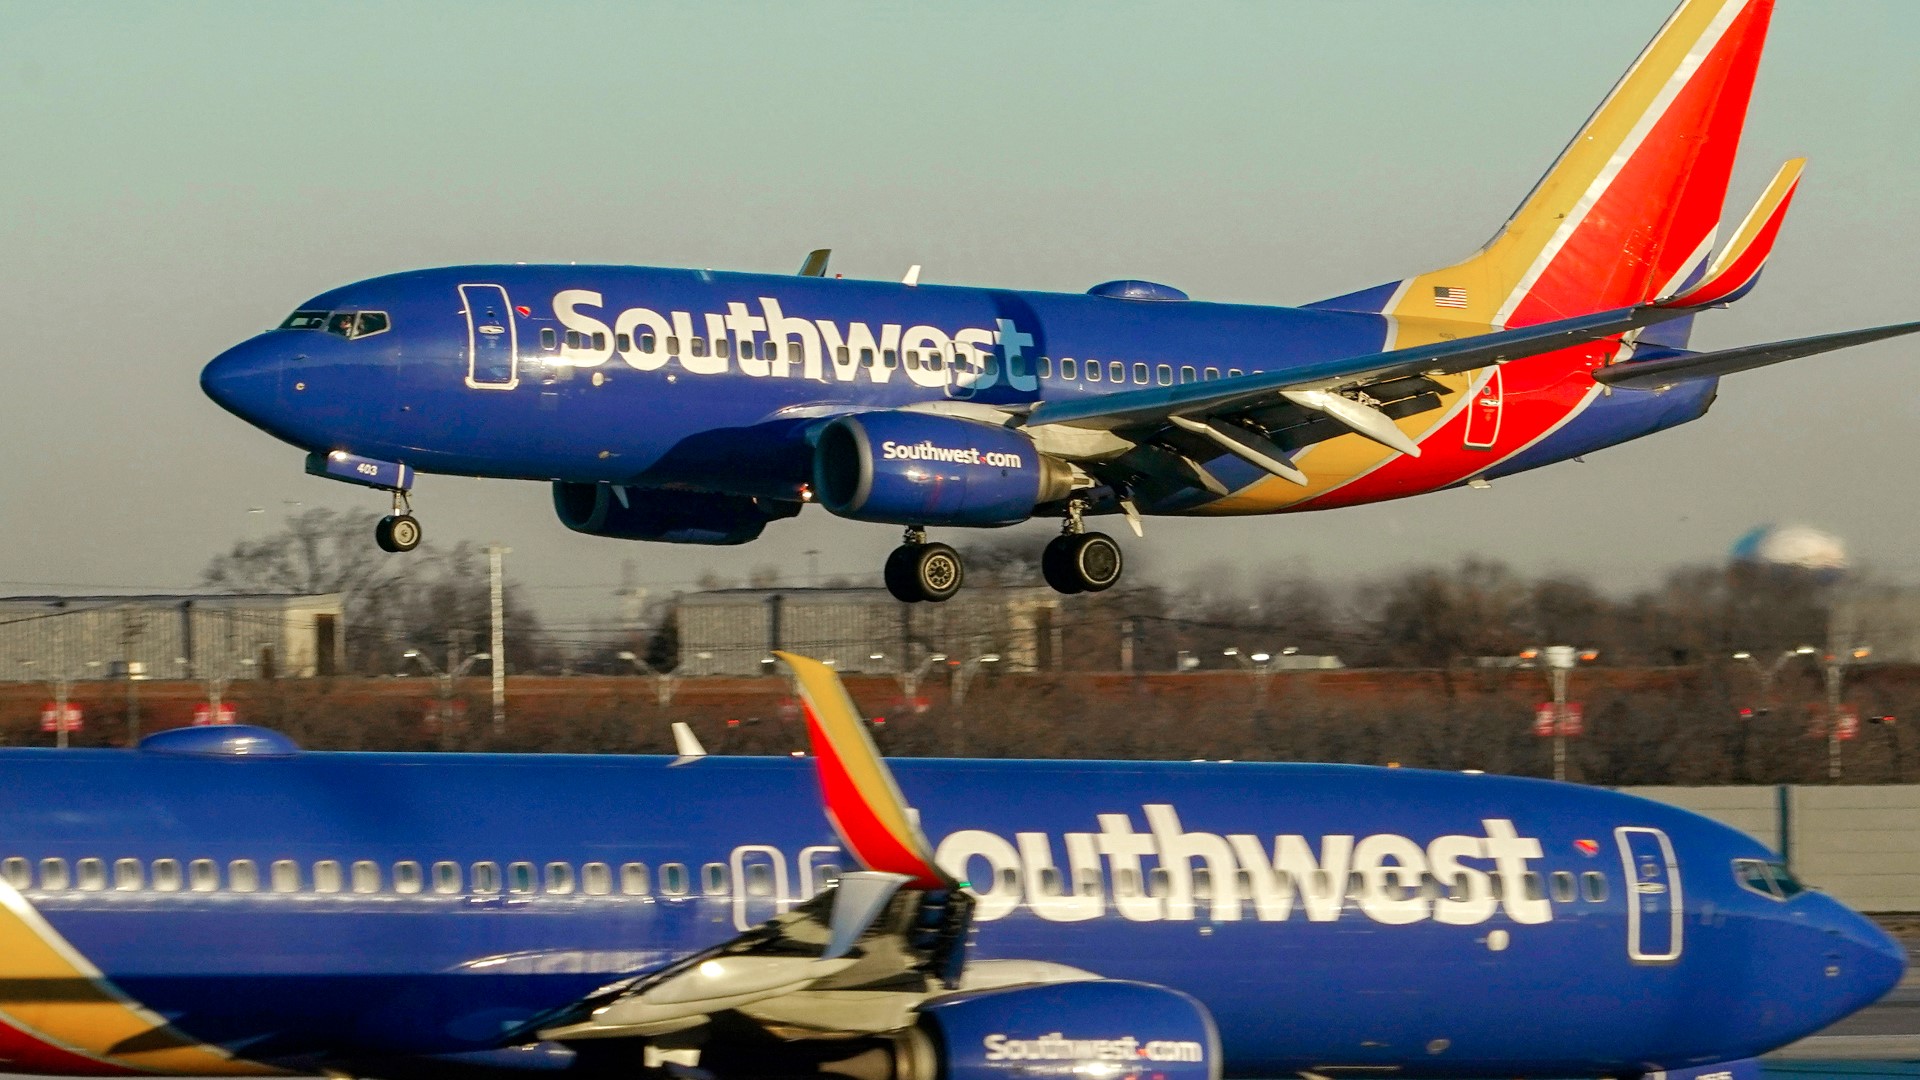 Texas-based Southwest Airlines is going to limit hiring and stop flying to four airports.